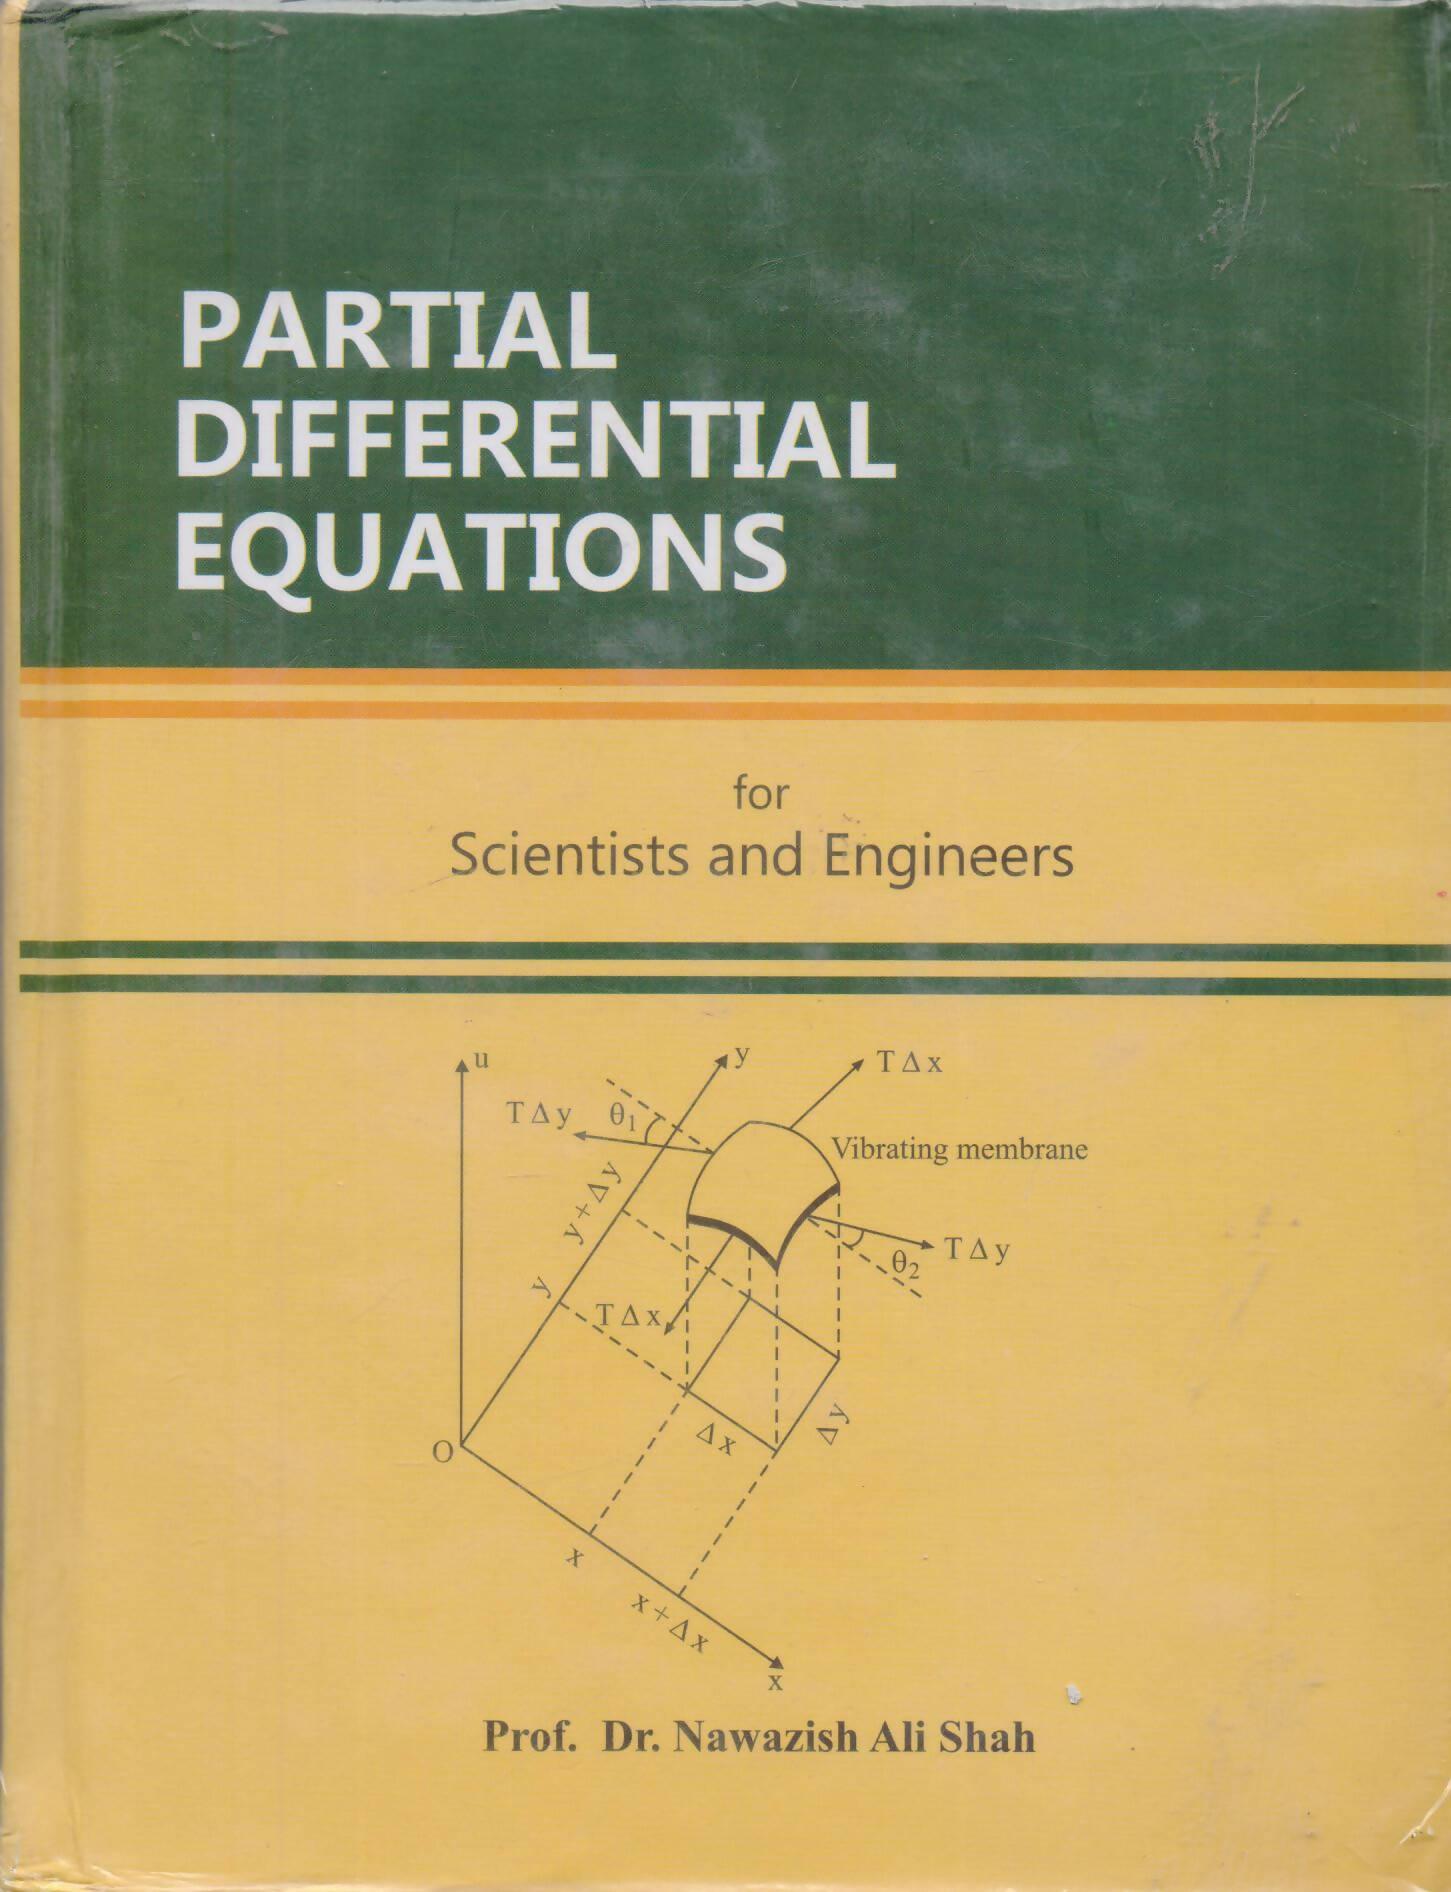 Partial Differential Equations for Scientists and Engineers by Pros. Dr. Nawazish Ali Shah - ValueBox